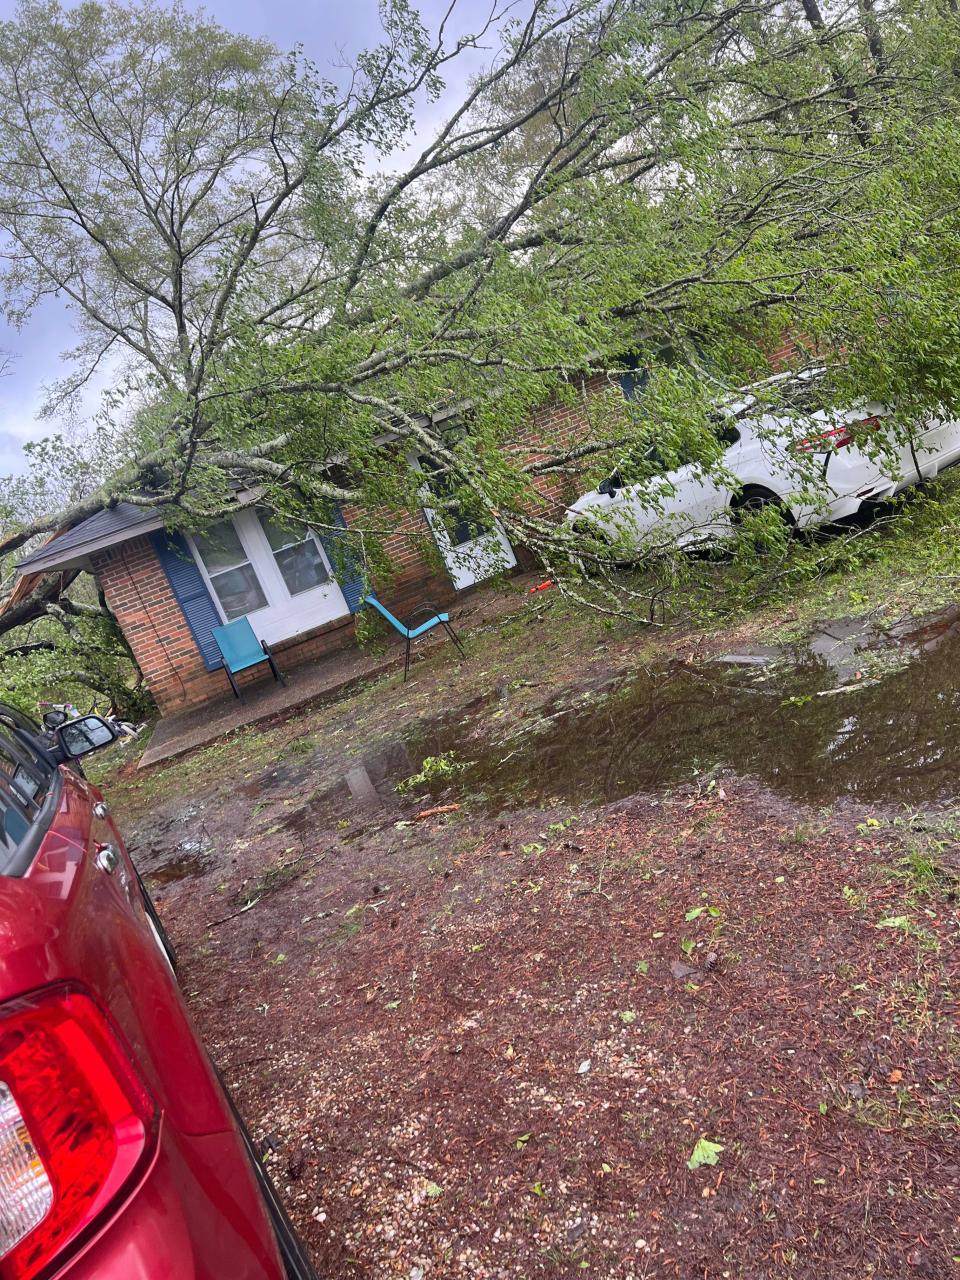 A tree destroyed part of Kristin Hand's home on Meadow Lane Drive in Elmore, Alabama, during late-night storms on March 26.